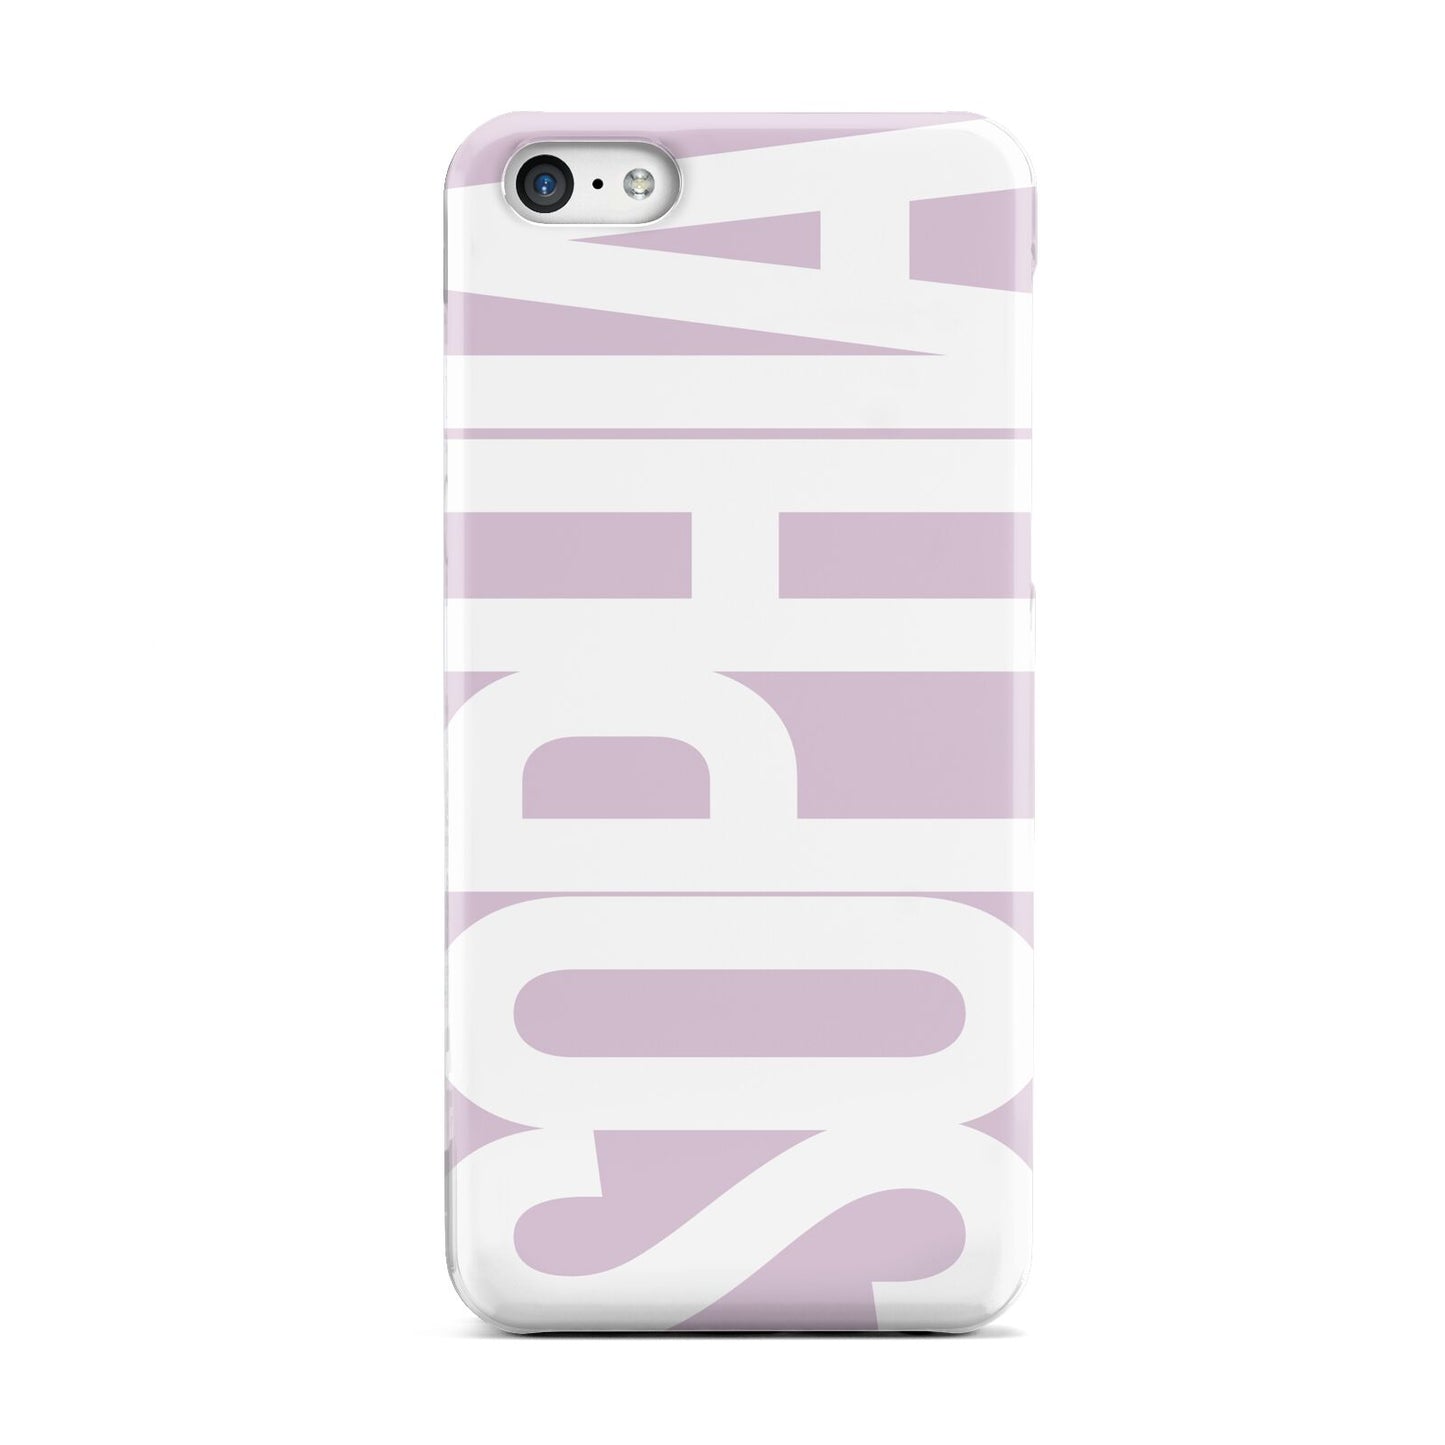 Dusty Pink with Bold White Text Apple iPhone 5c Case